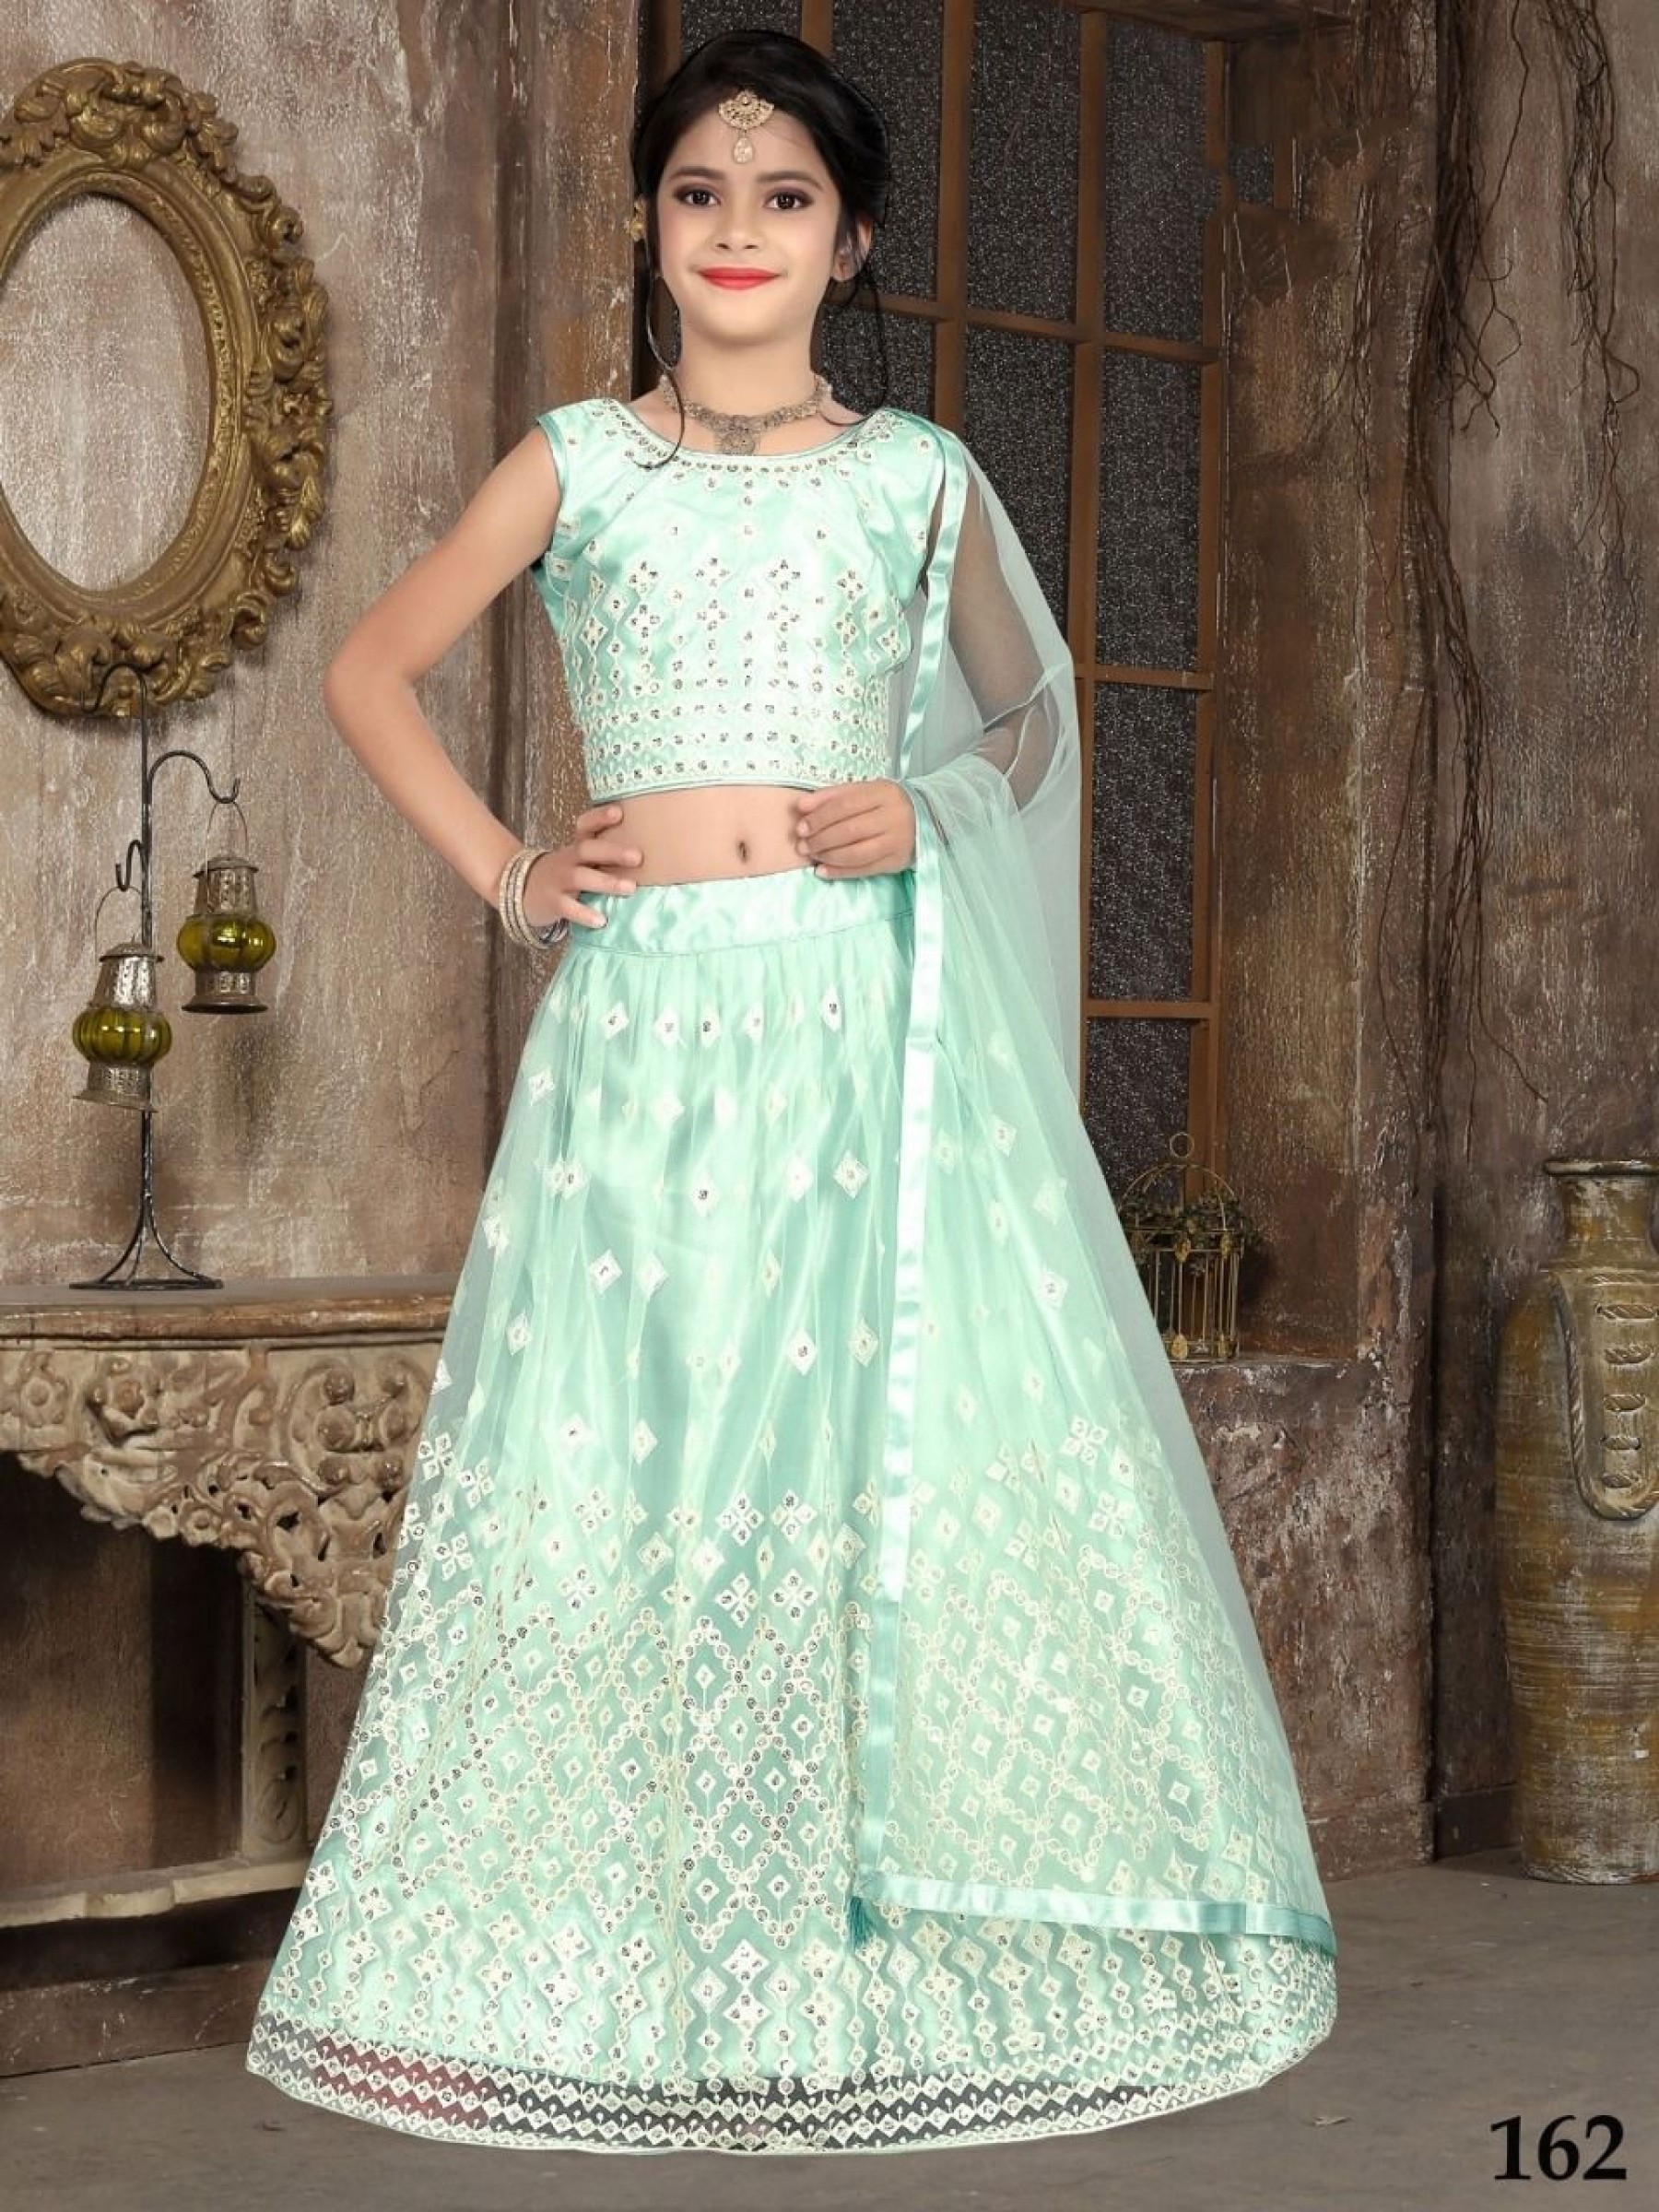 Geogratte  Party Wear Kids Lehenga In Light Green WIth Embrodiery Work 